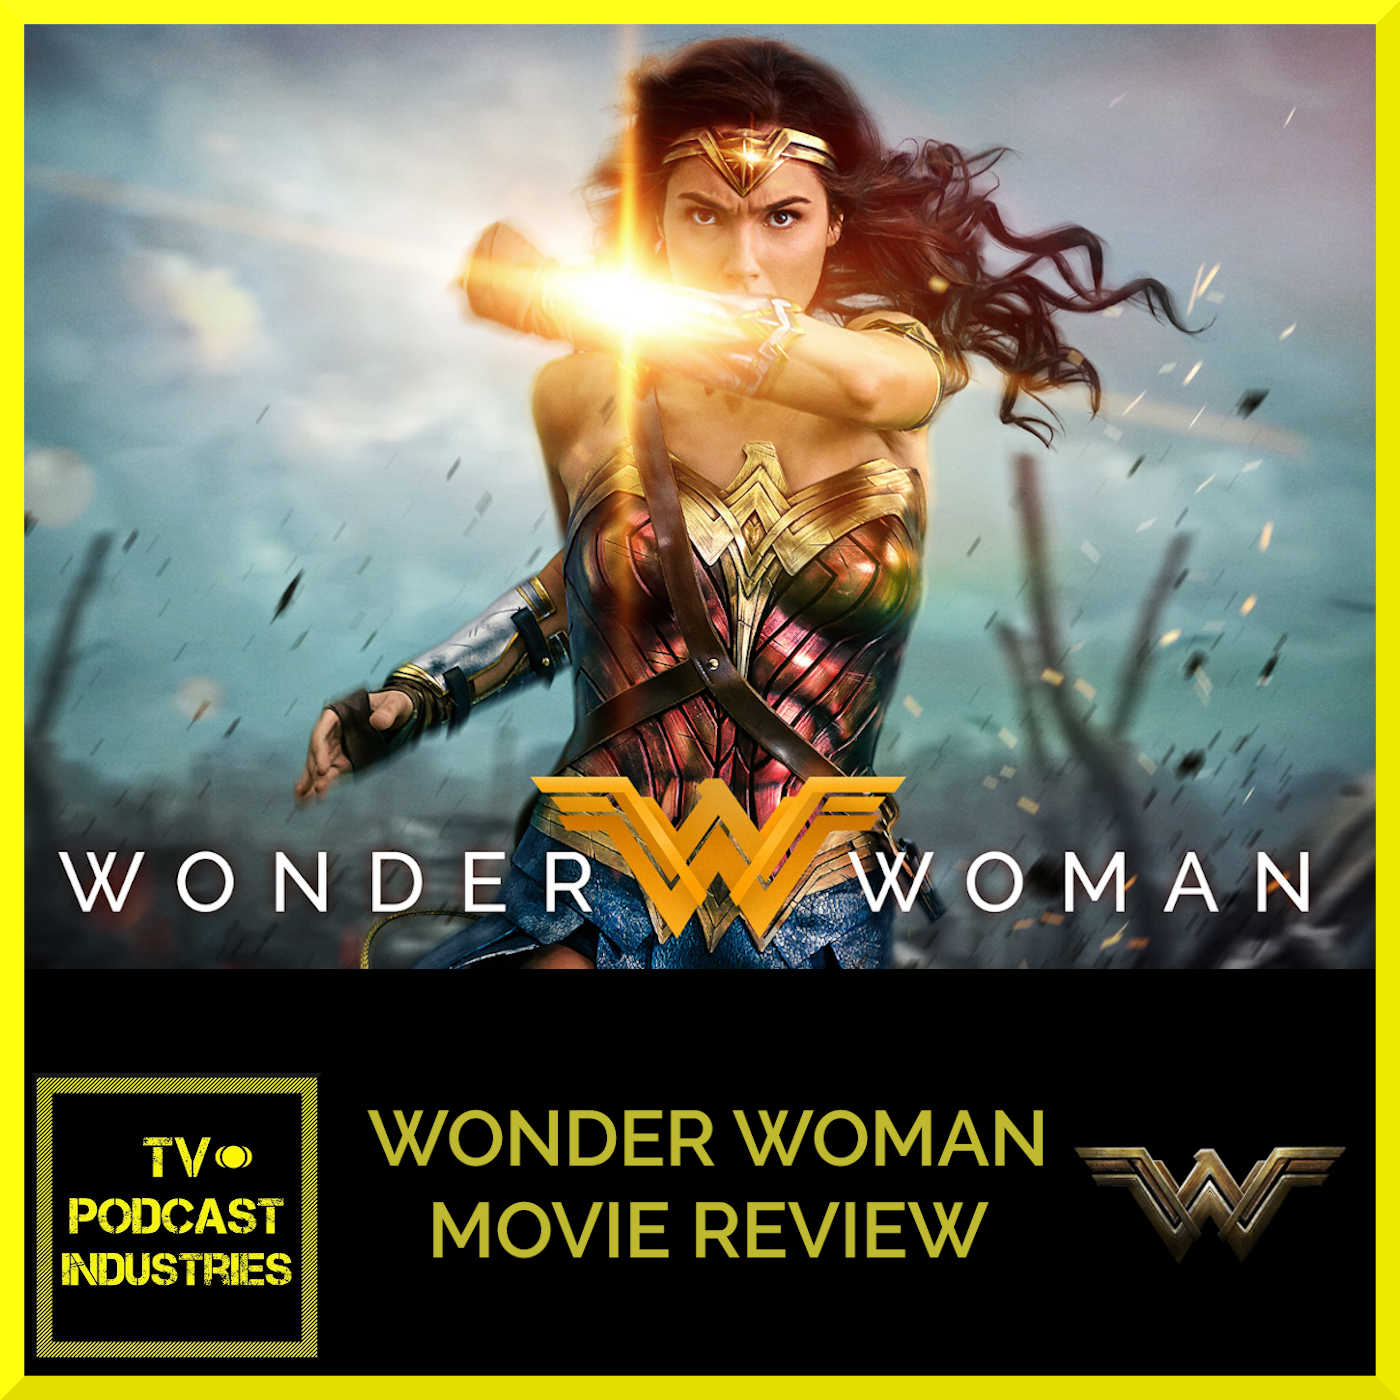 Wonder Woman Movie Review by TV Podcast Industries